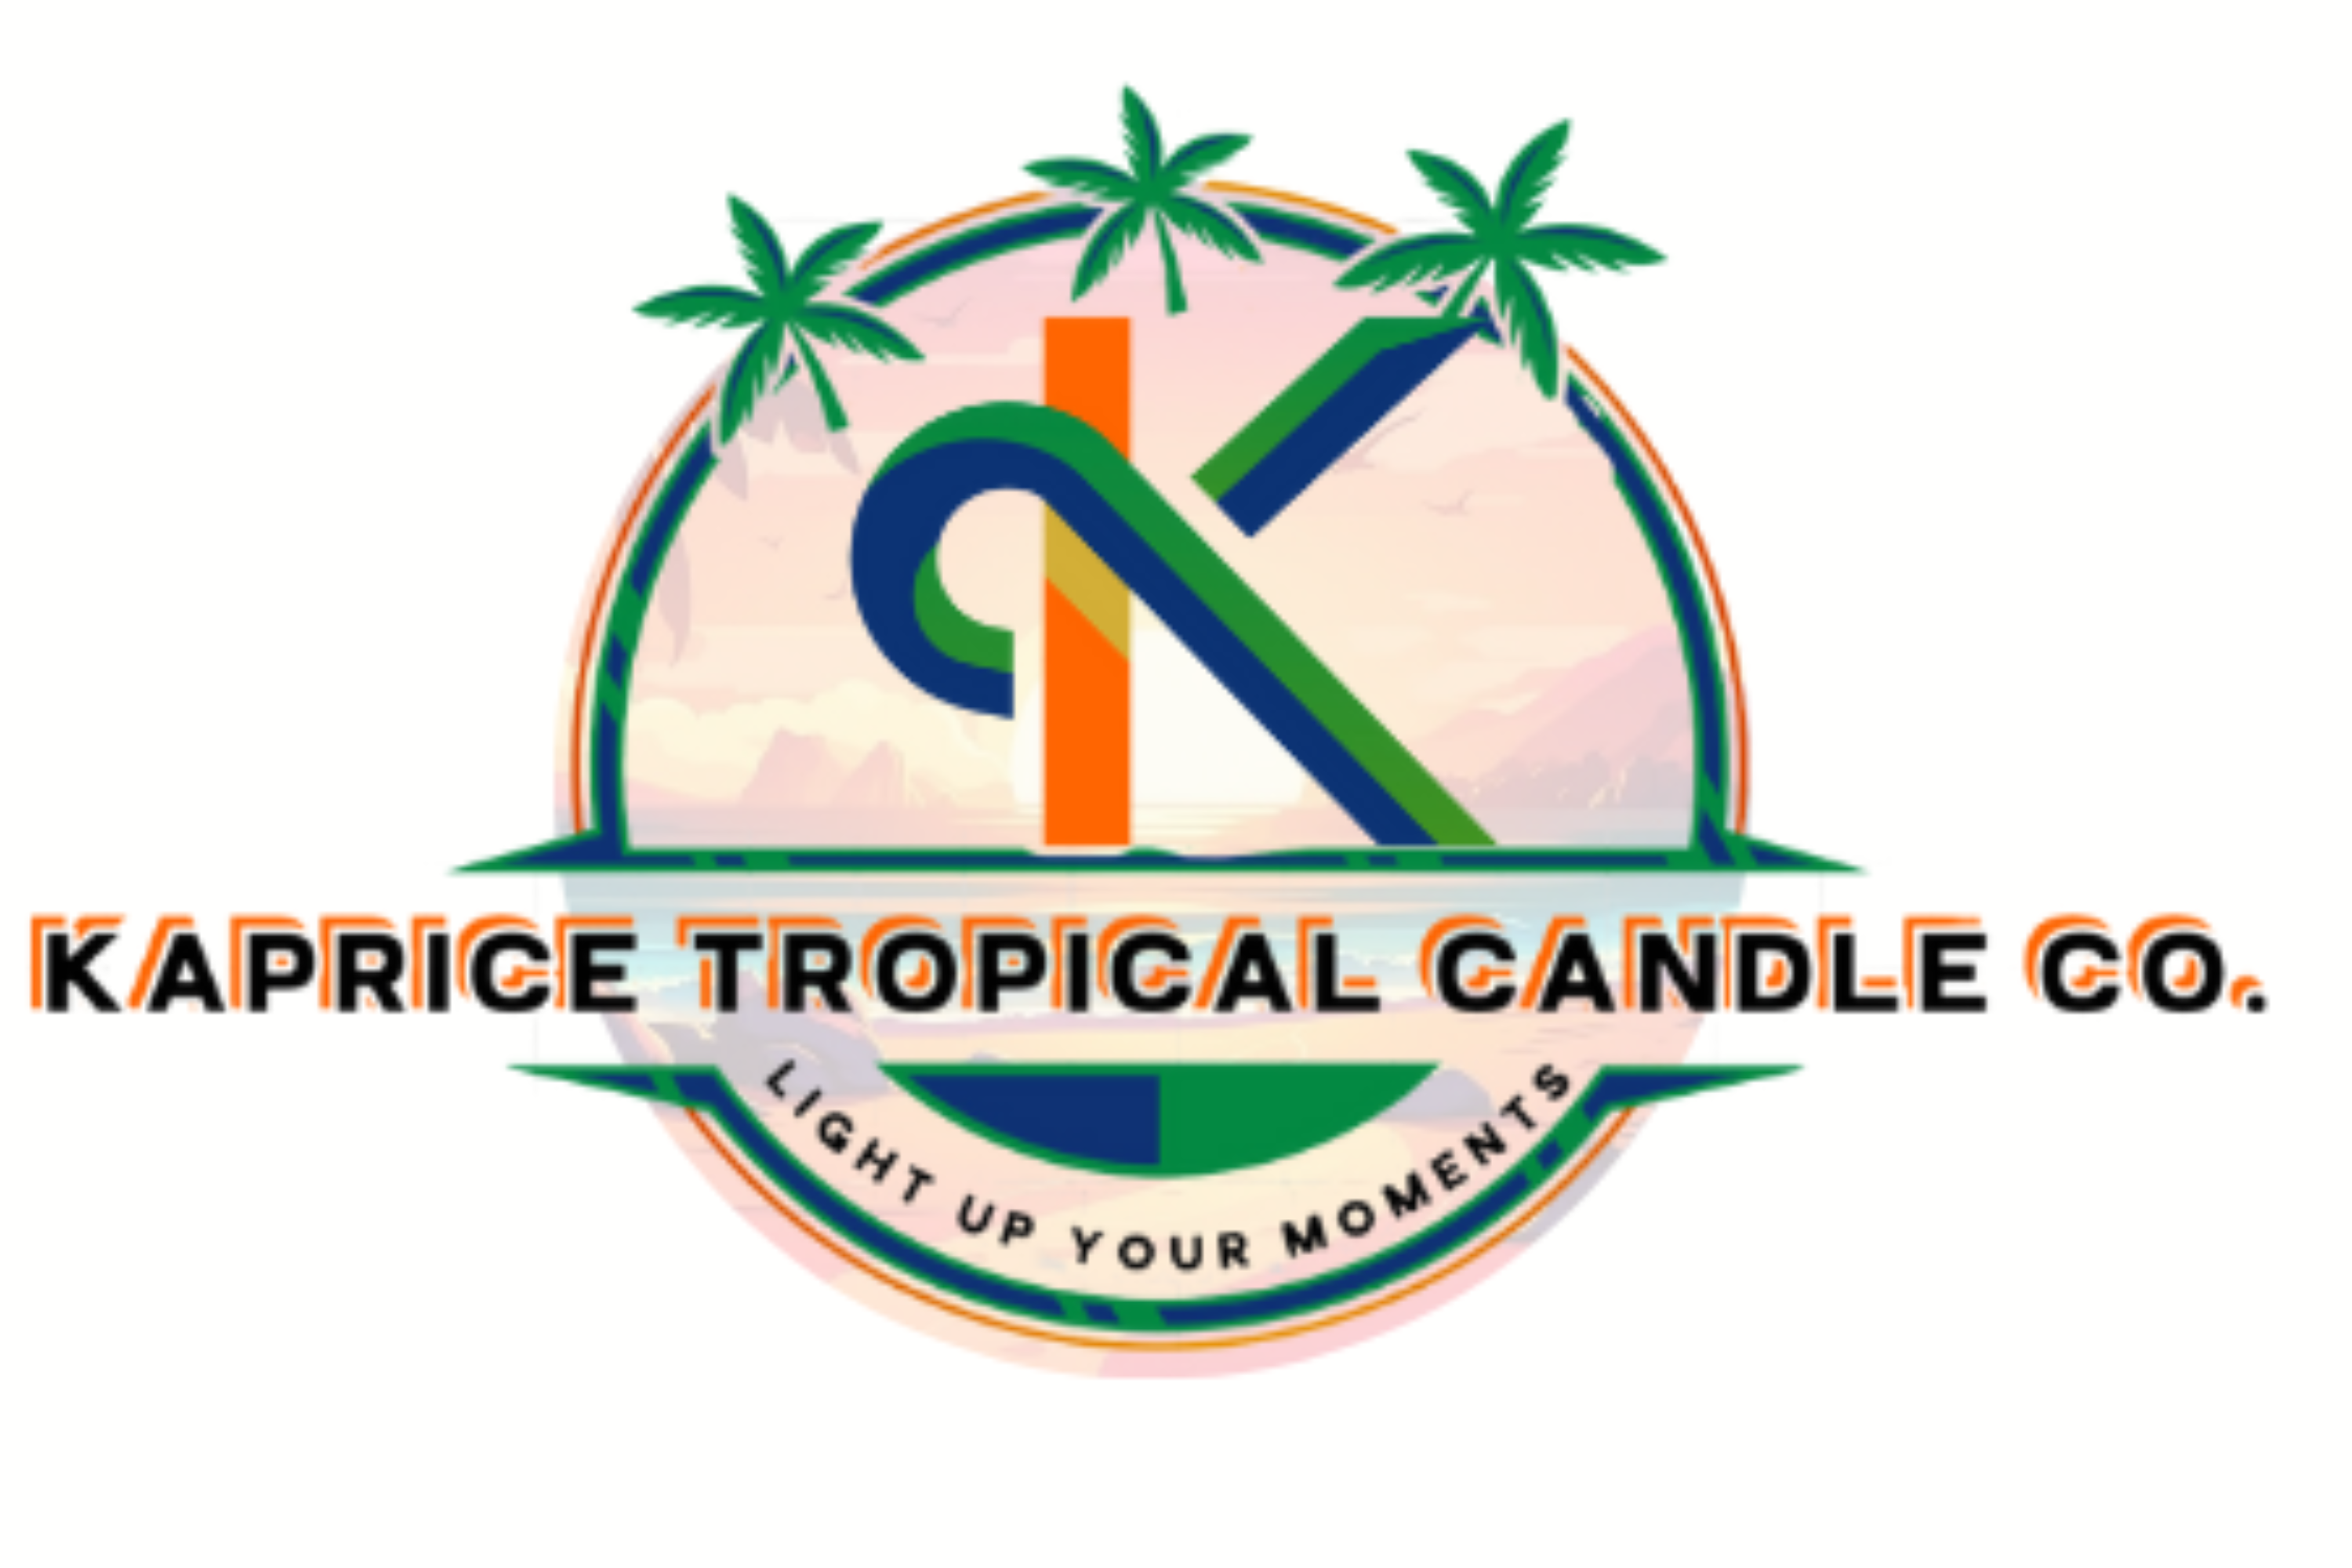 Kaprice Tropical Candle Co.